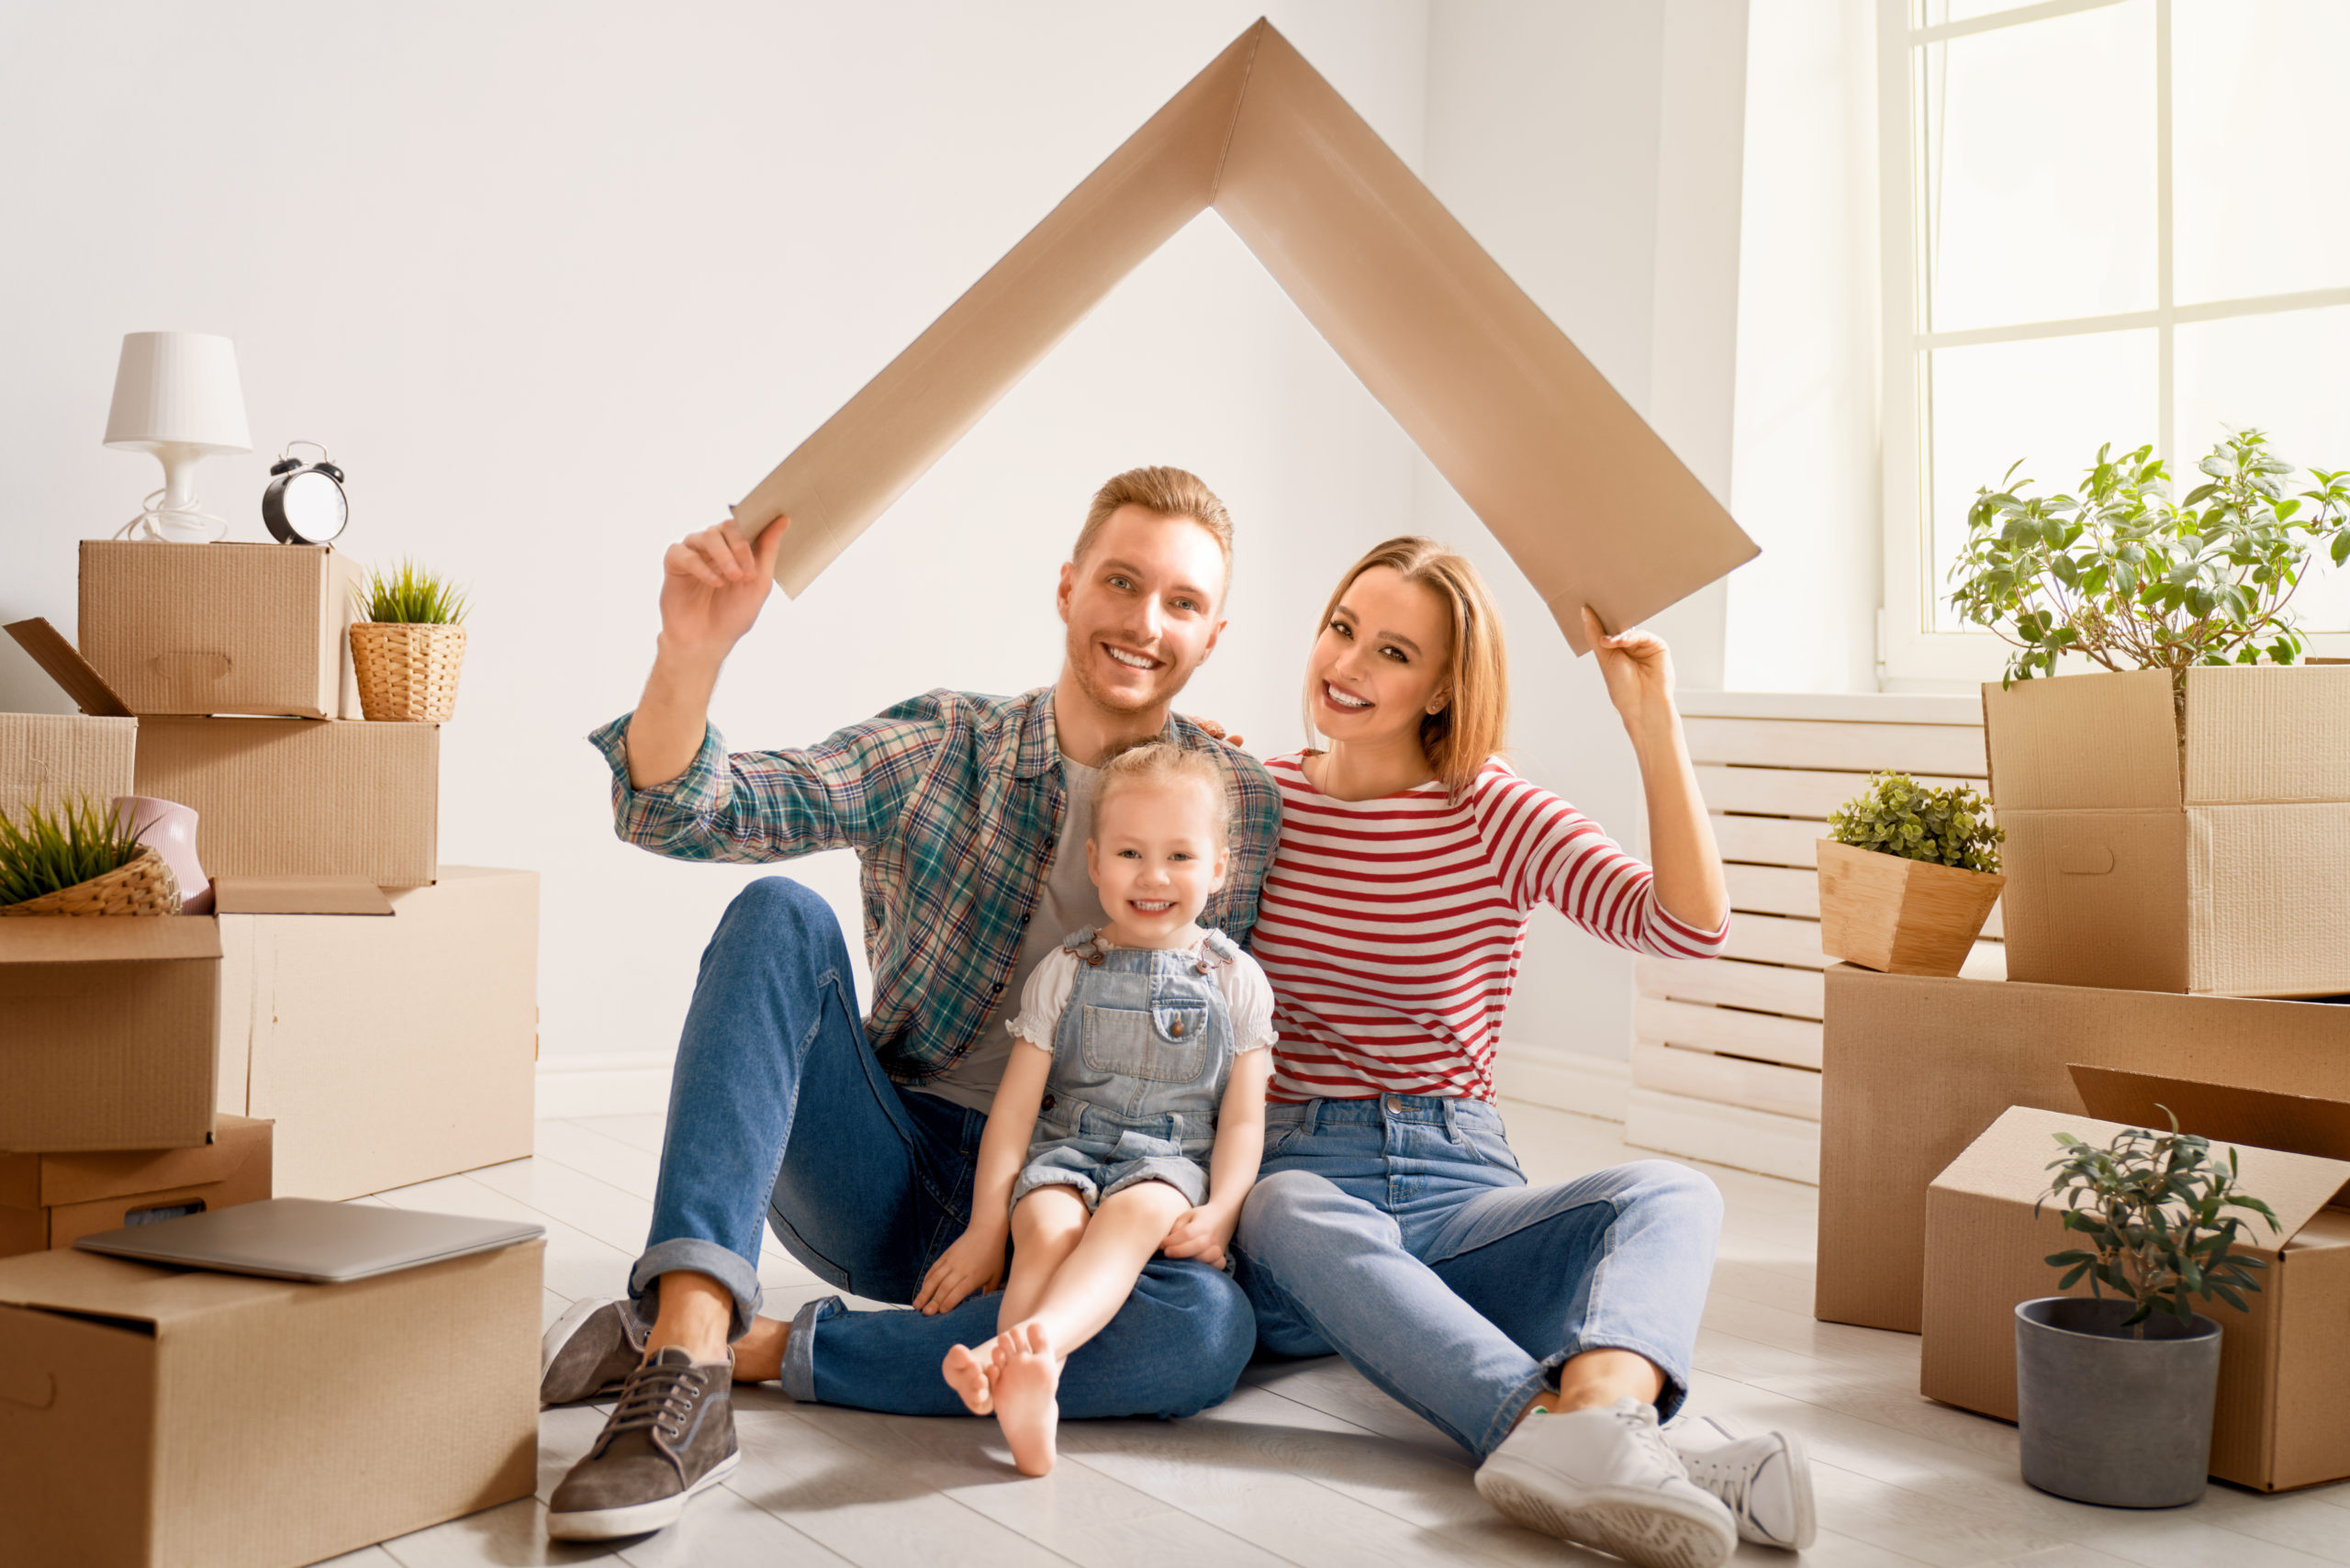 How To Find The Best Homes For Family Rent?